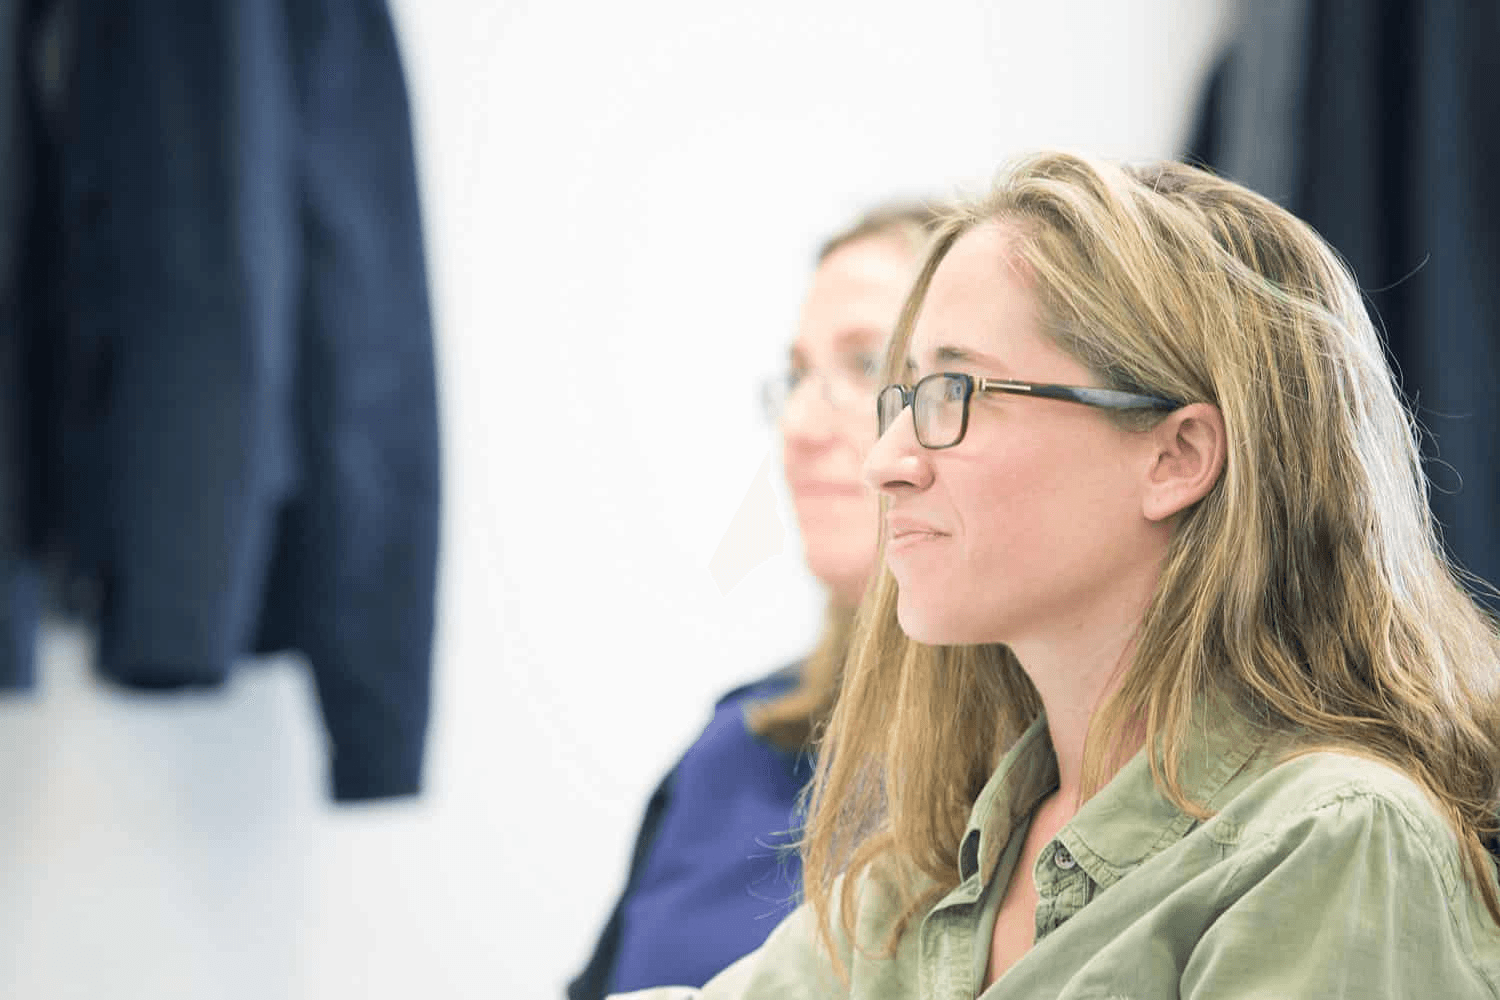 Blonde woman with glasses in a class